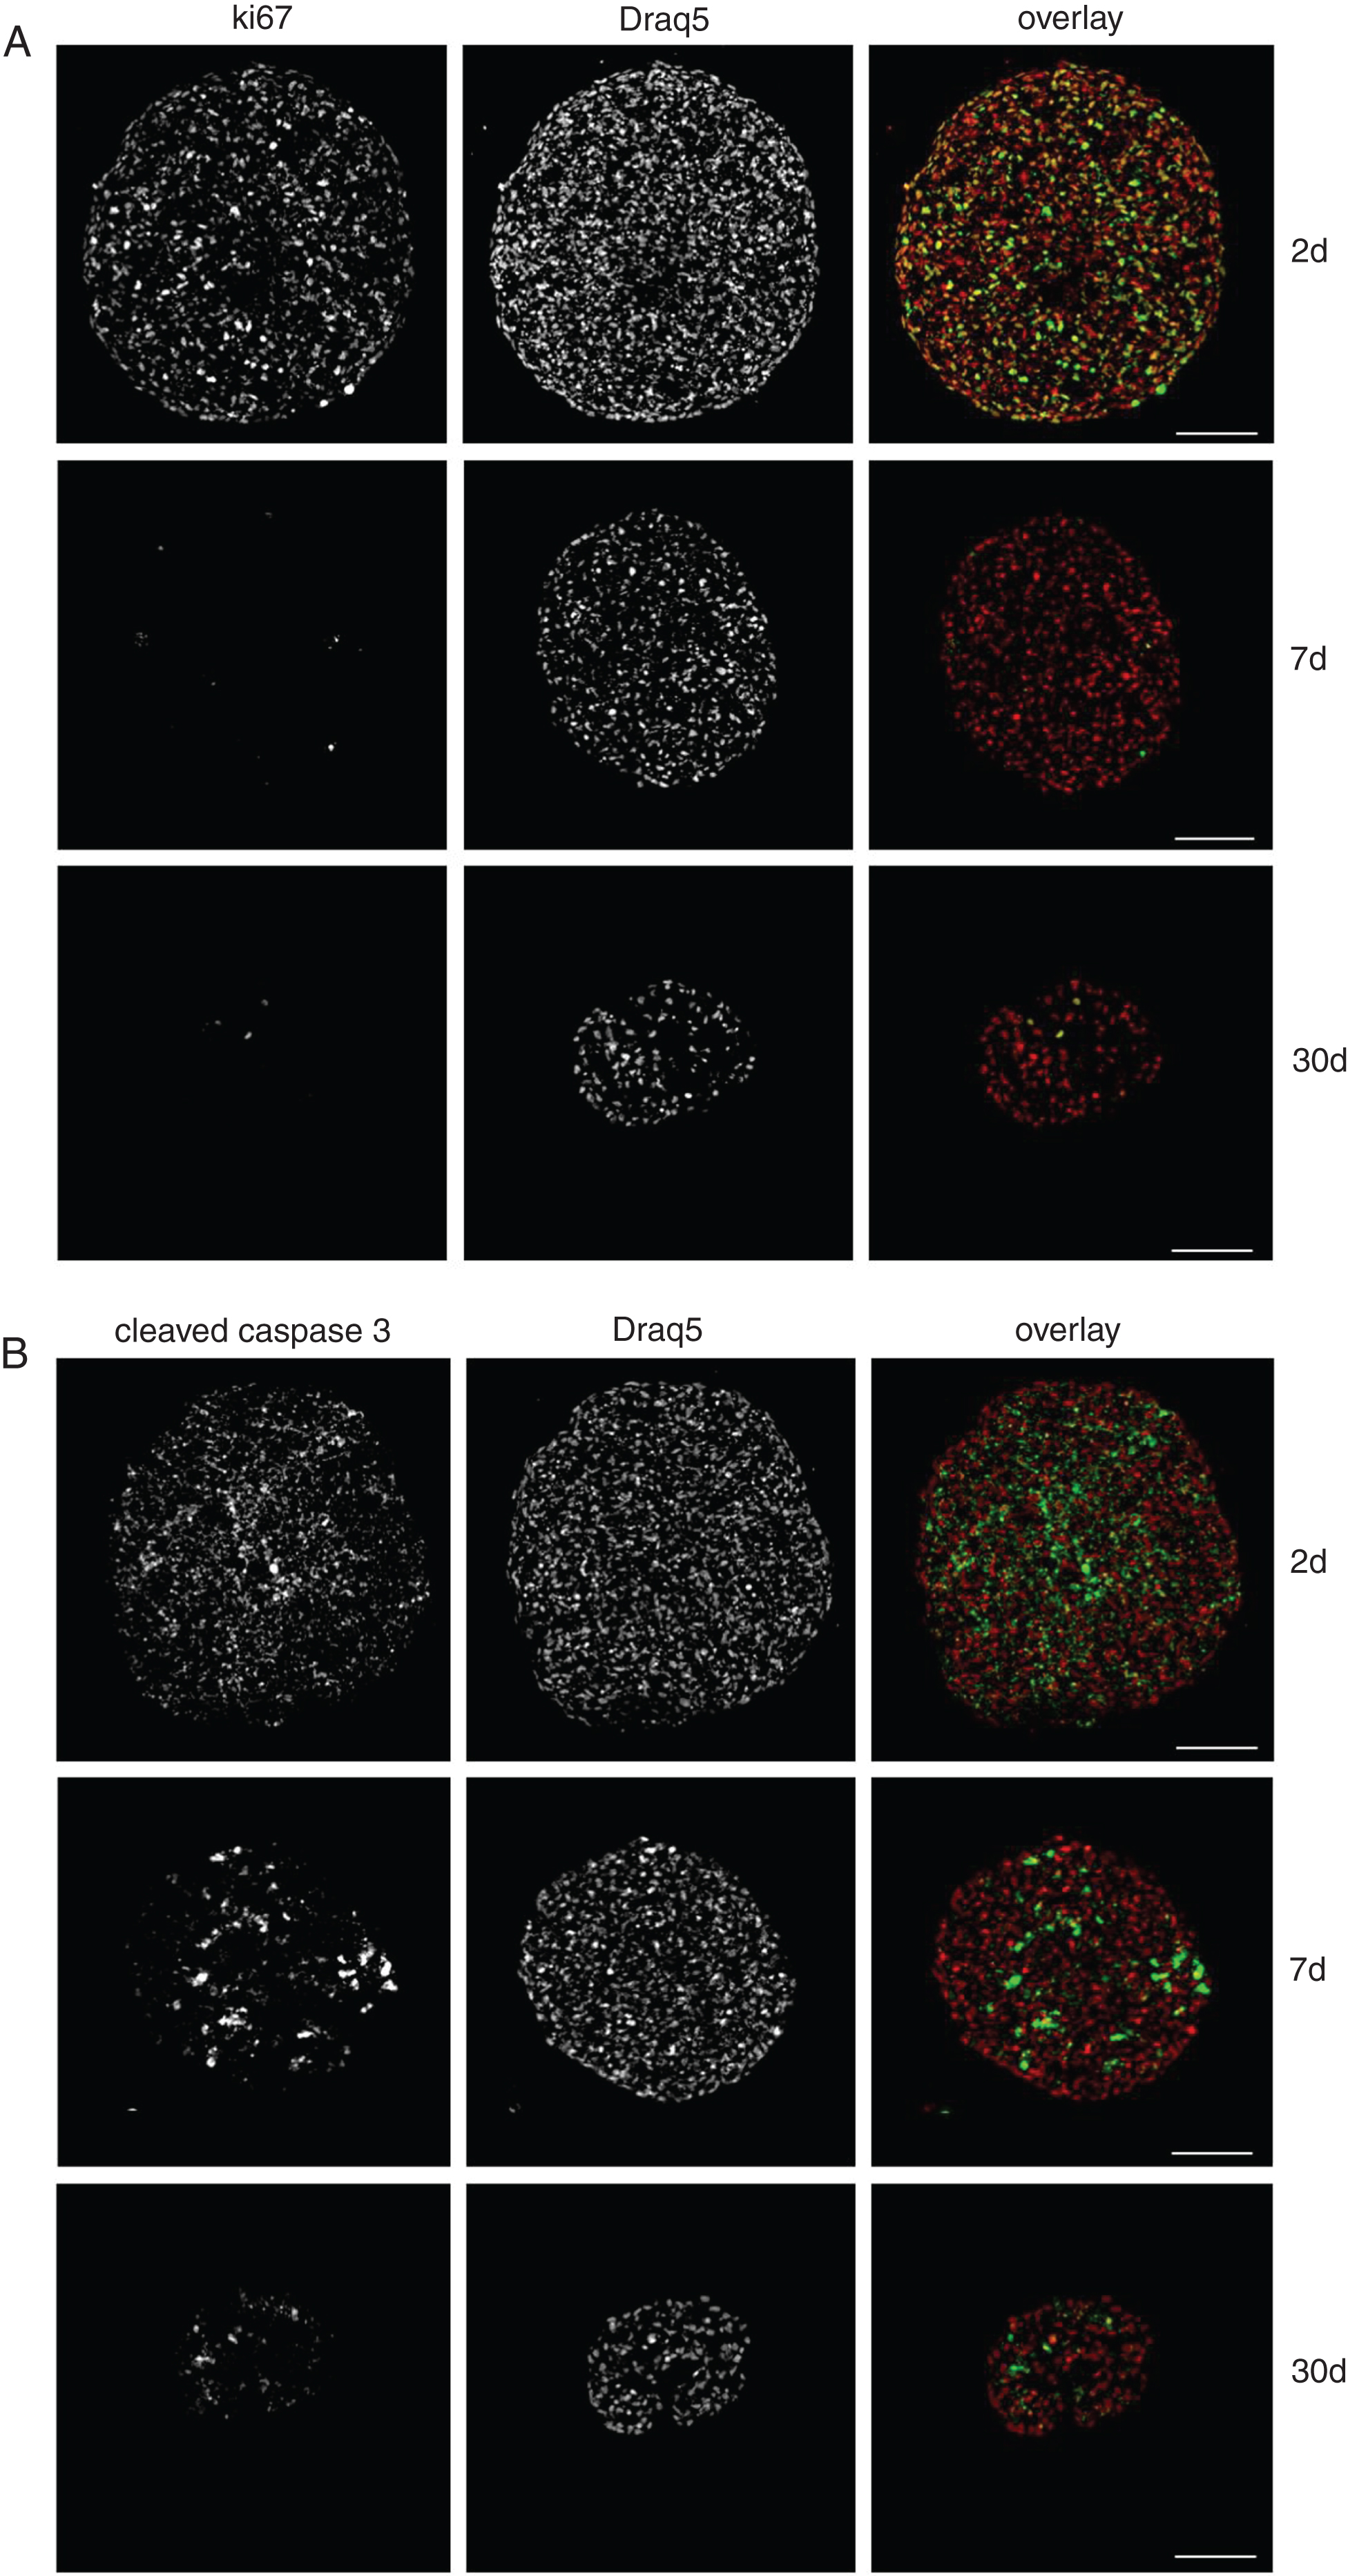  Phenotypic analysis of HaCaT spheroids. HaCaT cells were grown as spheroids. After 2, 7, and 30 days, spheroids were sectioned into 10-μm thick slices and immunostained for Ki67 (A) or Cleaved caspase 3 (B), respectively. Nuclei were labeled with Draq5. Scale bars, 100 μm. Ki67 is a well-known marker to differentiate between dividing and postmitotic cells [102]. This is found within the nucleus during G1, S and G2, while in mitosis it is bound to dividing chromosomes. At G0 it is not present at all [100]. Caspase 3 is a major executioner caspase in all types of apoptosis. Its prodomain is cleaved upon apoptosis induction thereby activating its function that leads to the execution of apoptotic cell death [102, 104, 105].